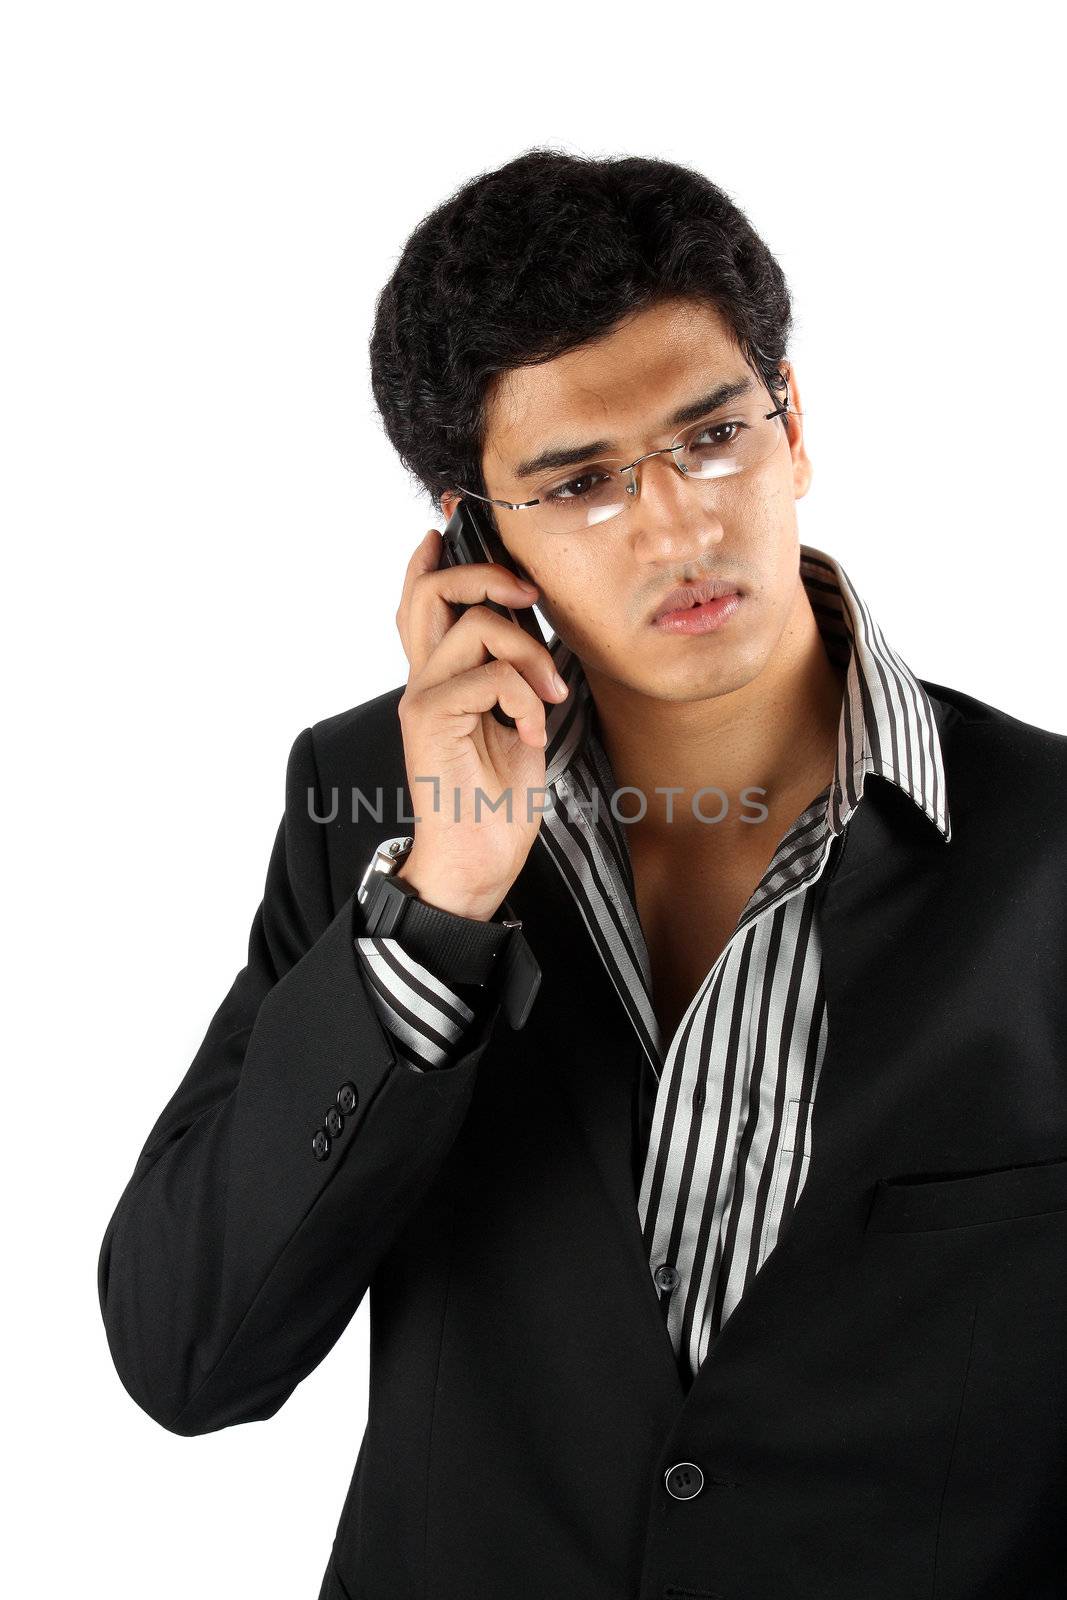 A young Indian businessman talking on his cellphone.